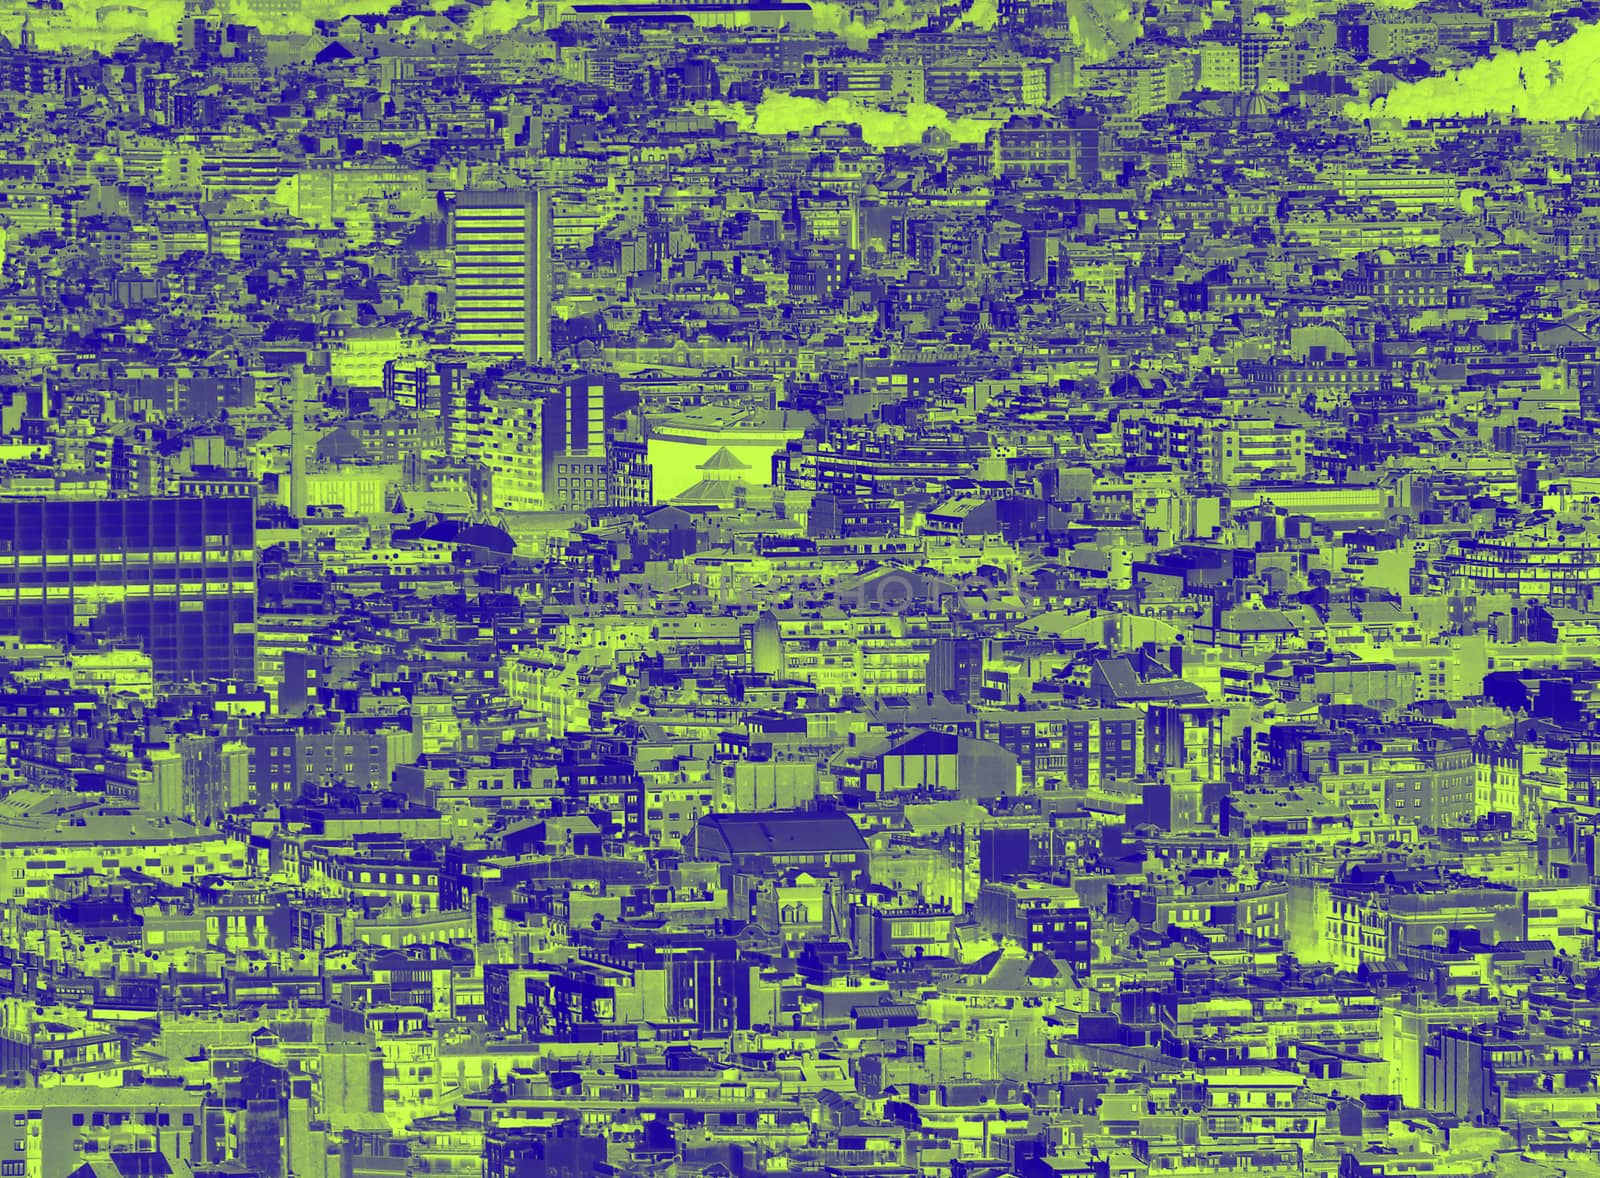 a blue and green duotone crowded urban cityscape background with hundreds of densely packed buildings